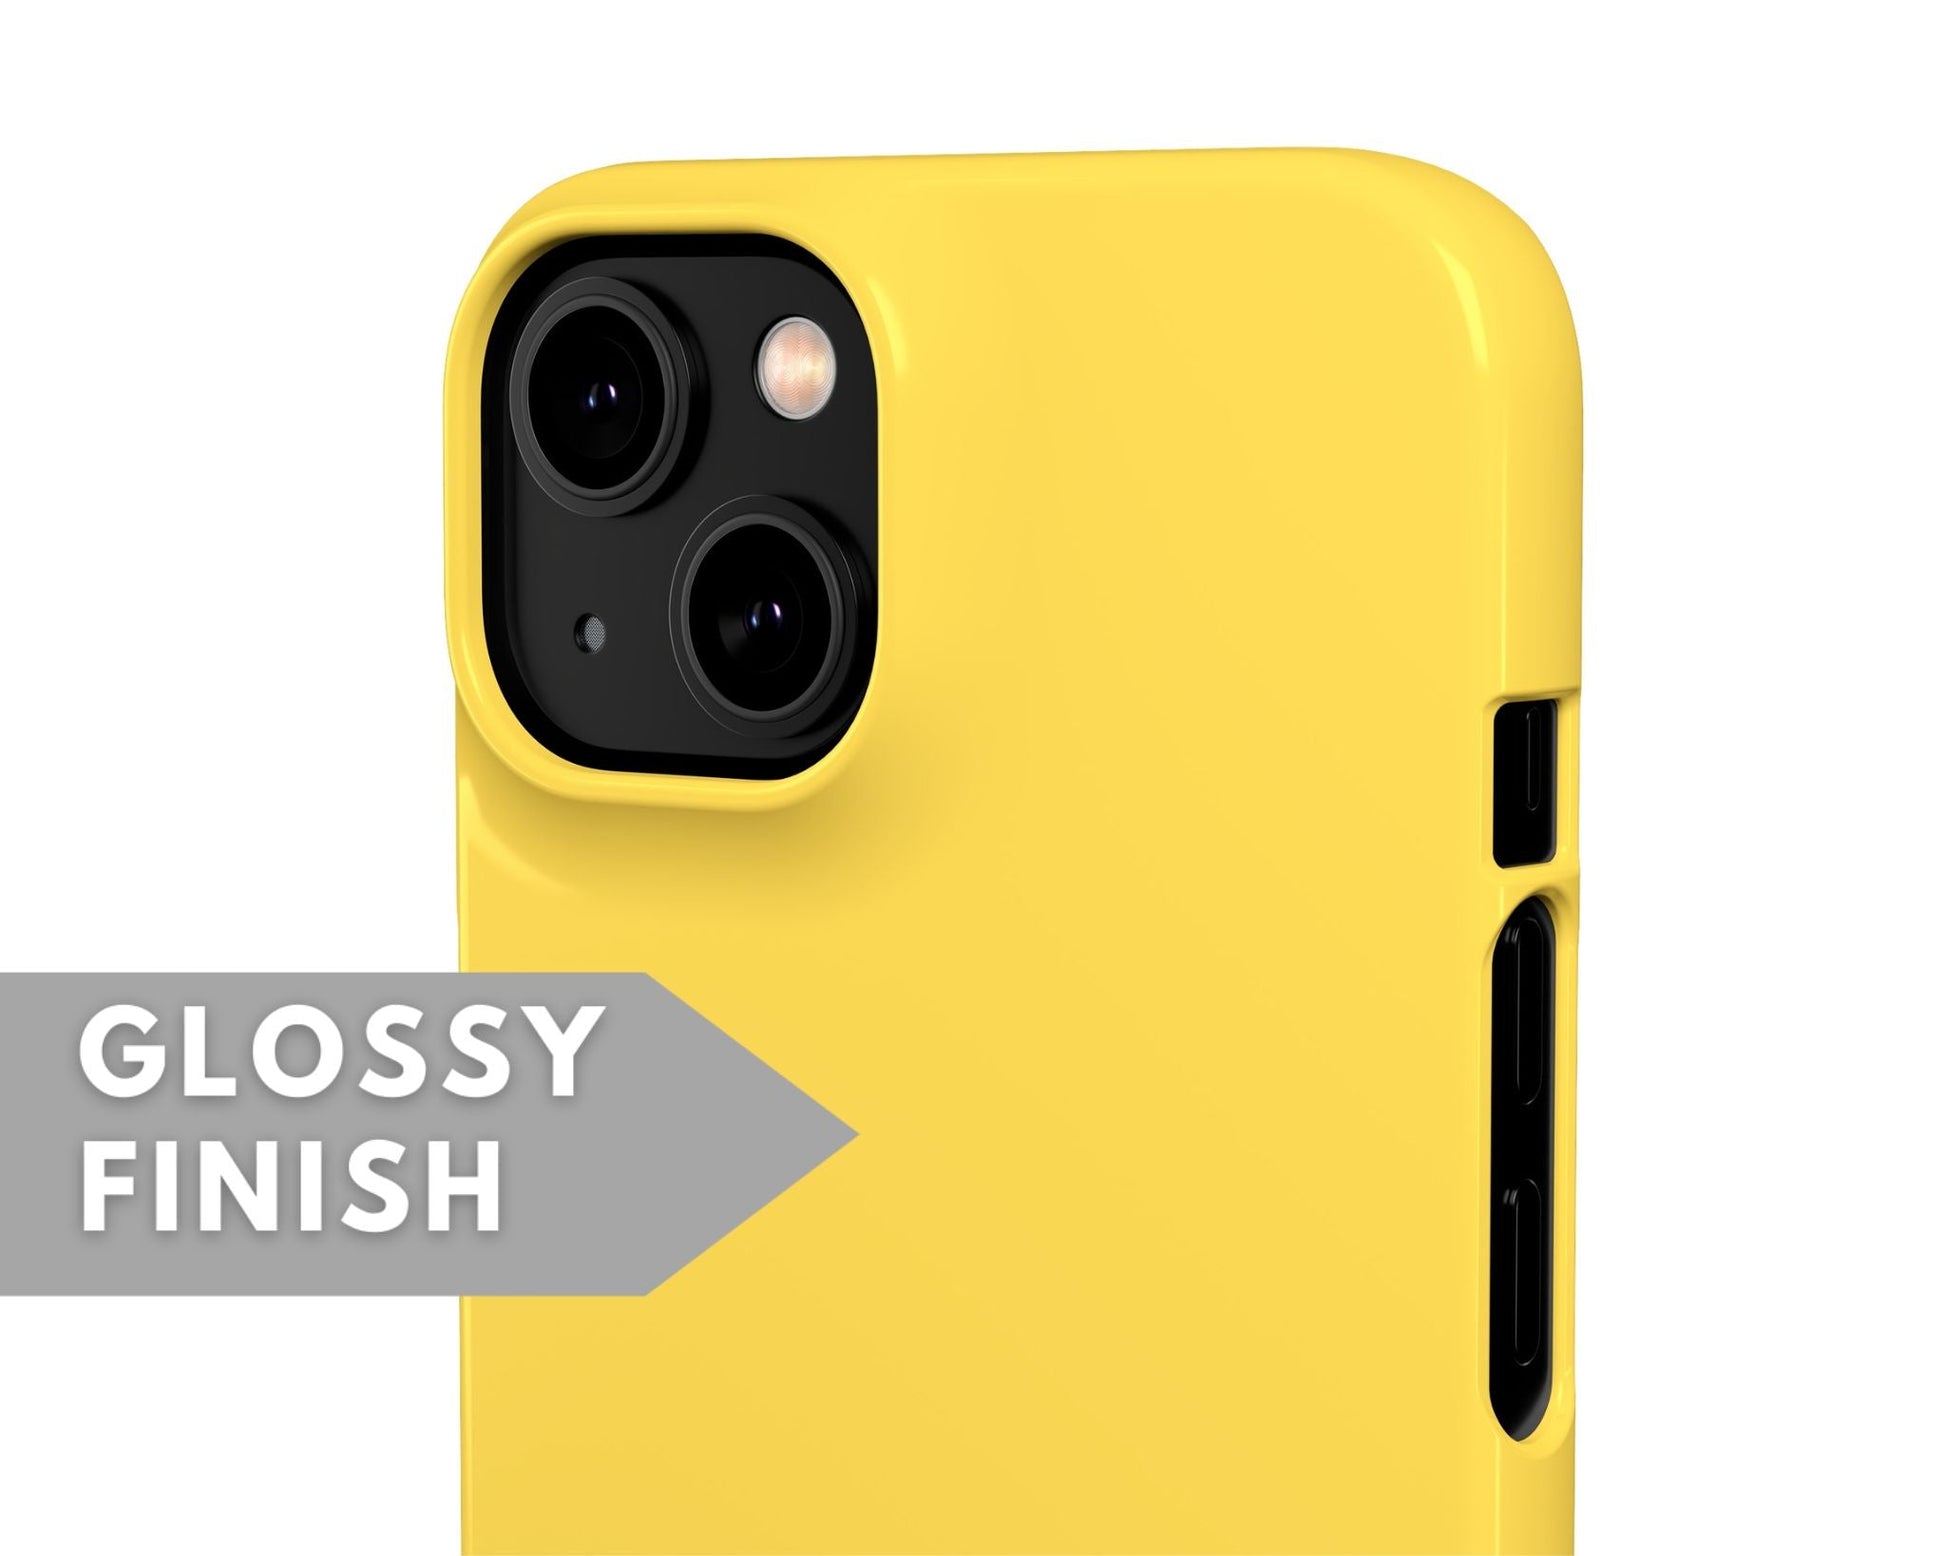 Yellow Snap Case - Classy Cases